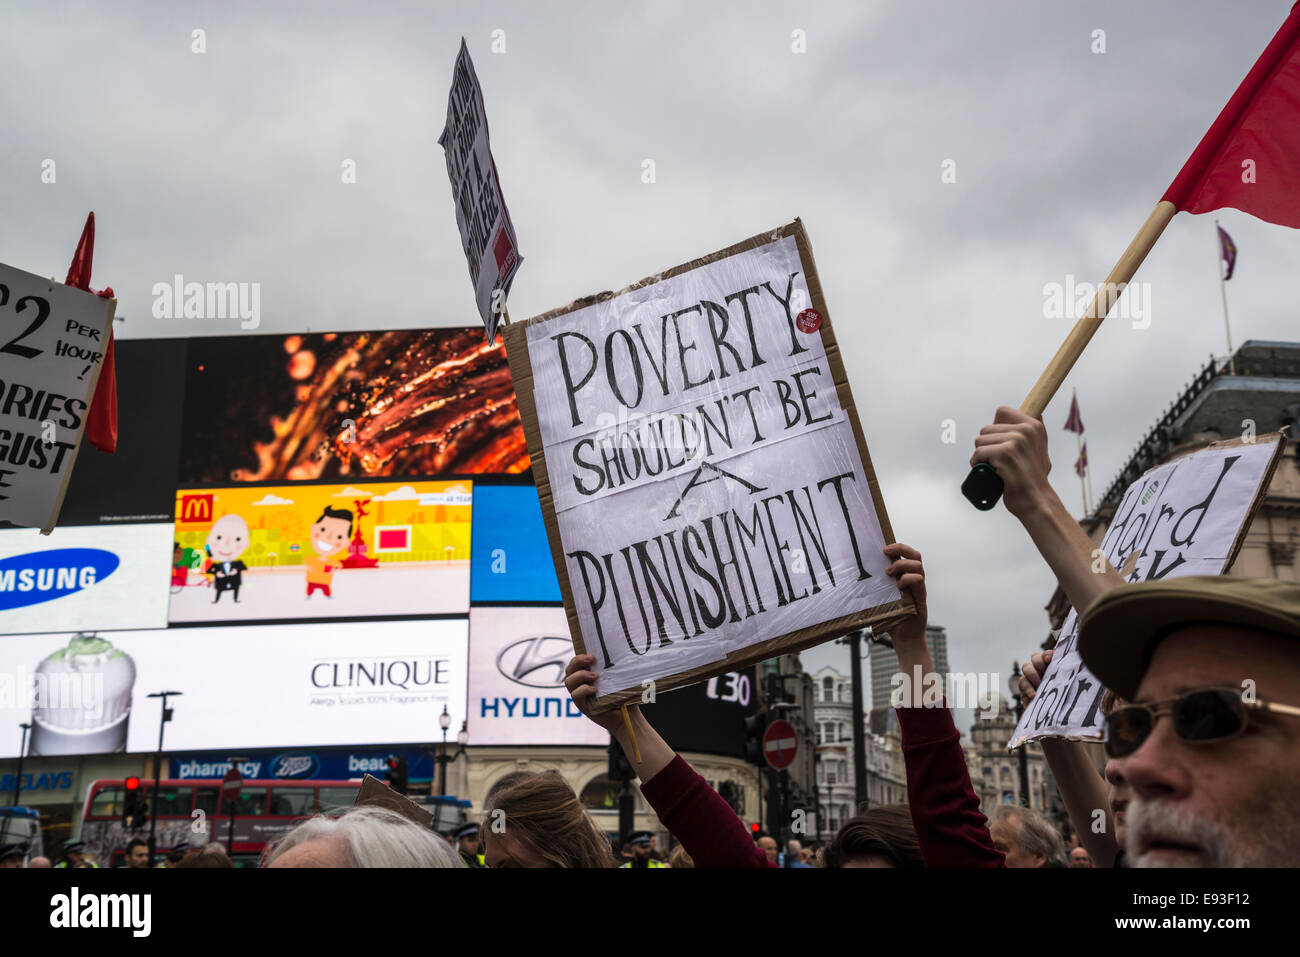 Poverty Shouldn't be a Punishment placard in Piccadilly Circus. Britain Needs a Pay Rise march, London, 18 October 2014, UK Credit:  Bjanka Kadic/Alamy Live News Stock Photo